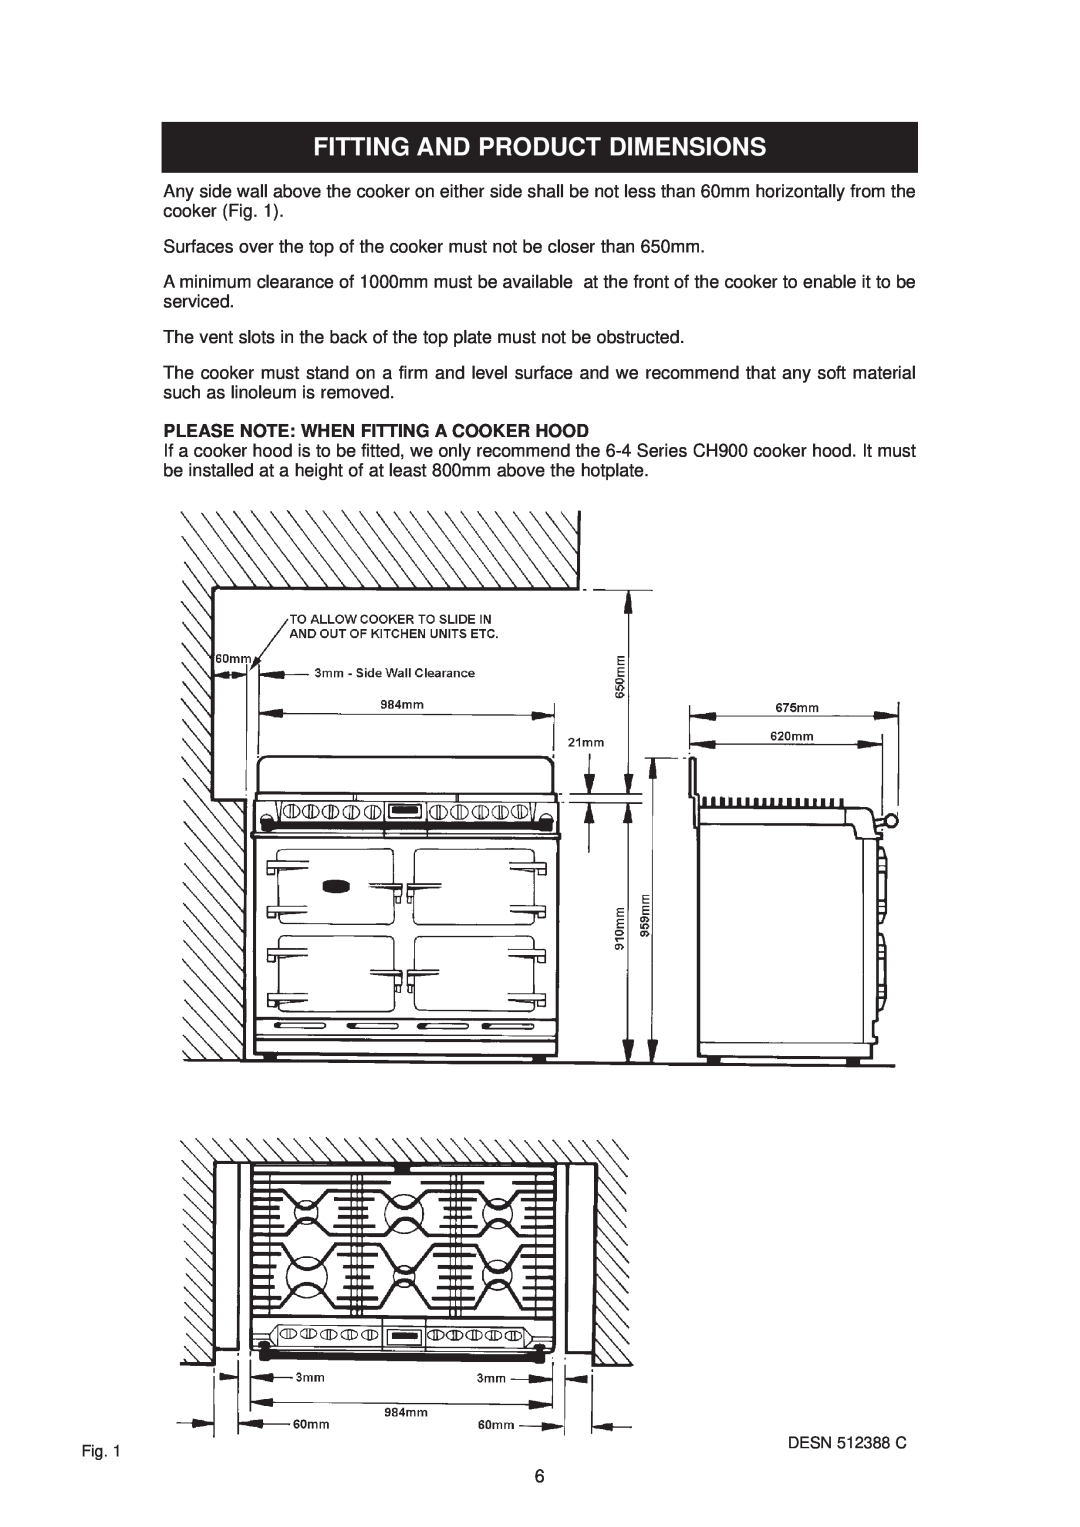 Aga Ranges DESN 512387 A owner manual Fitting And Product Dimensions, Please Note When Fitting A Cooker Hood 